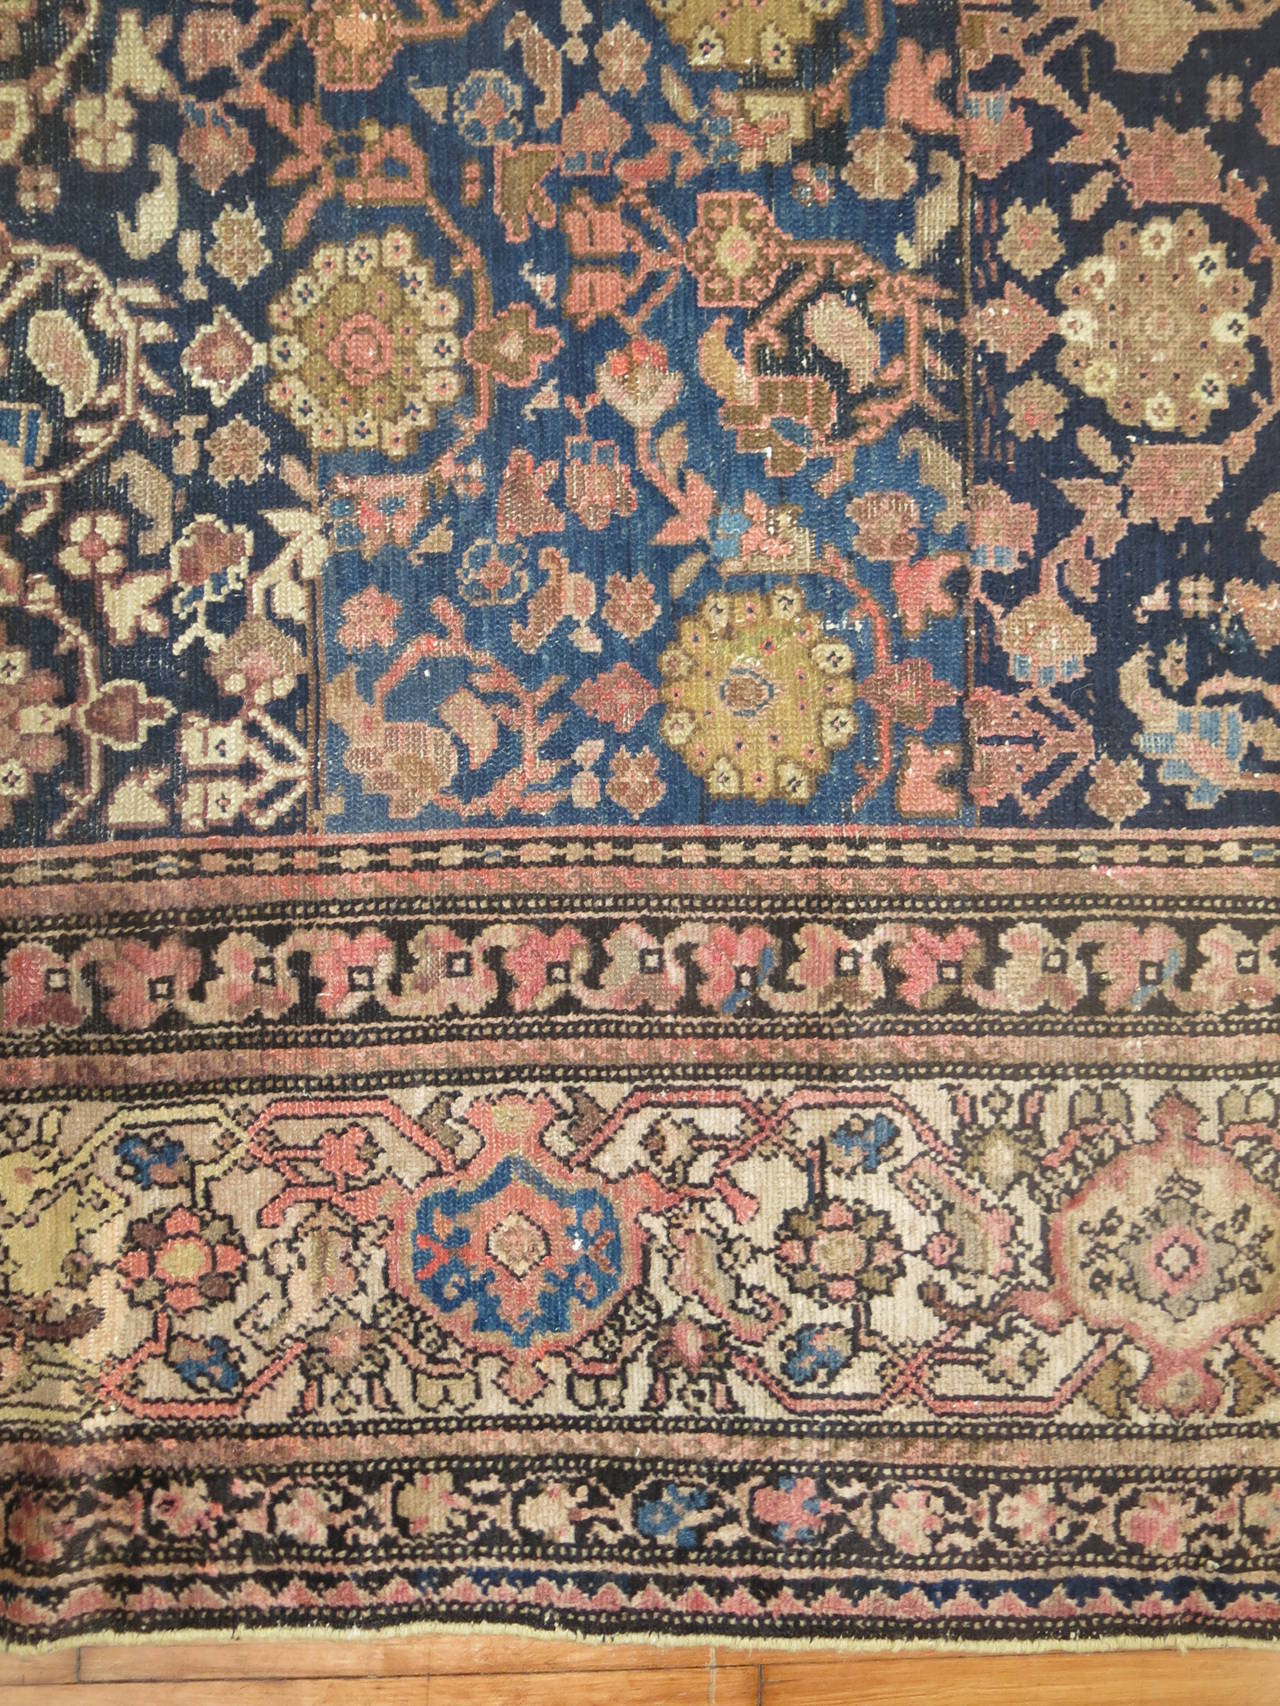 A rare size Persian Malayer rug with predominant accents in beige and dusty rose on an Abrash blue field,

circa 1920, measures: 10'7